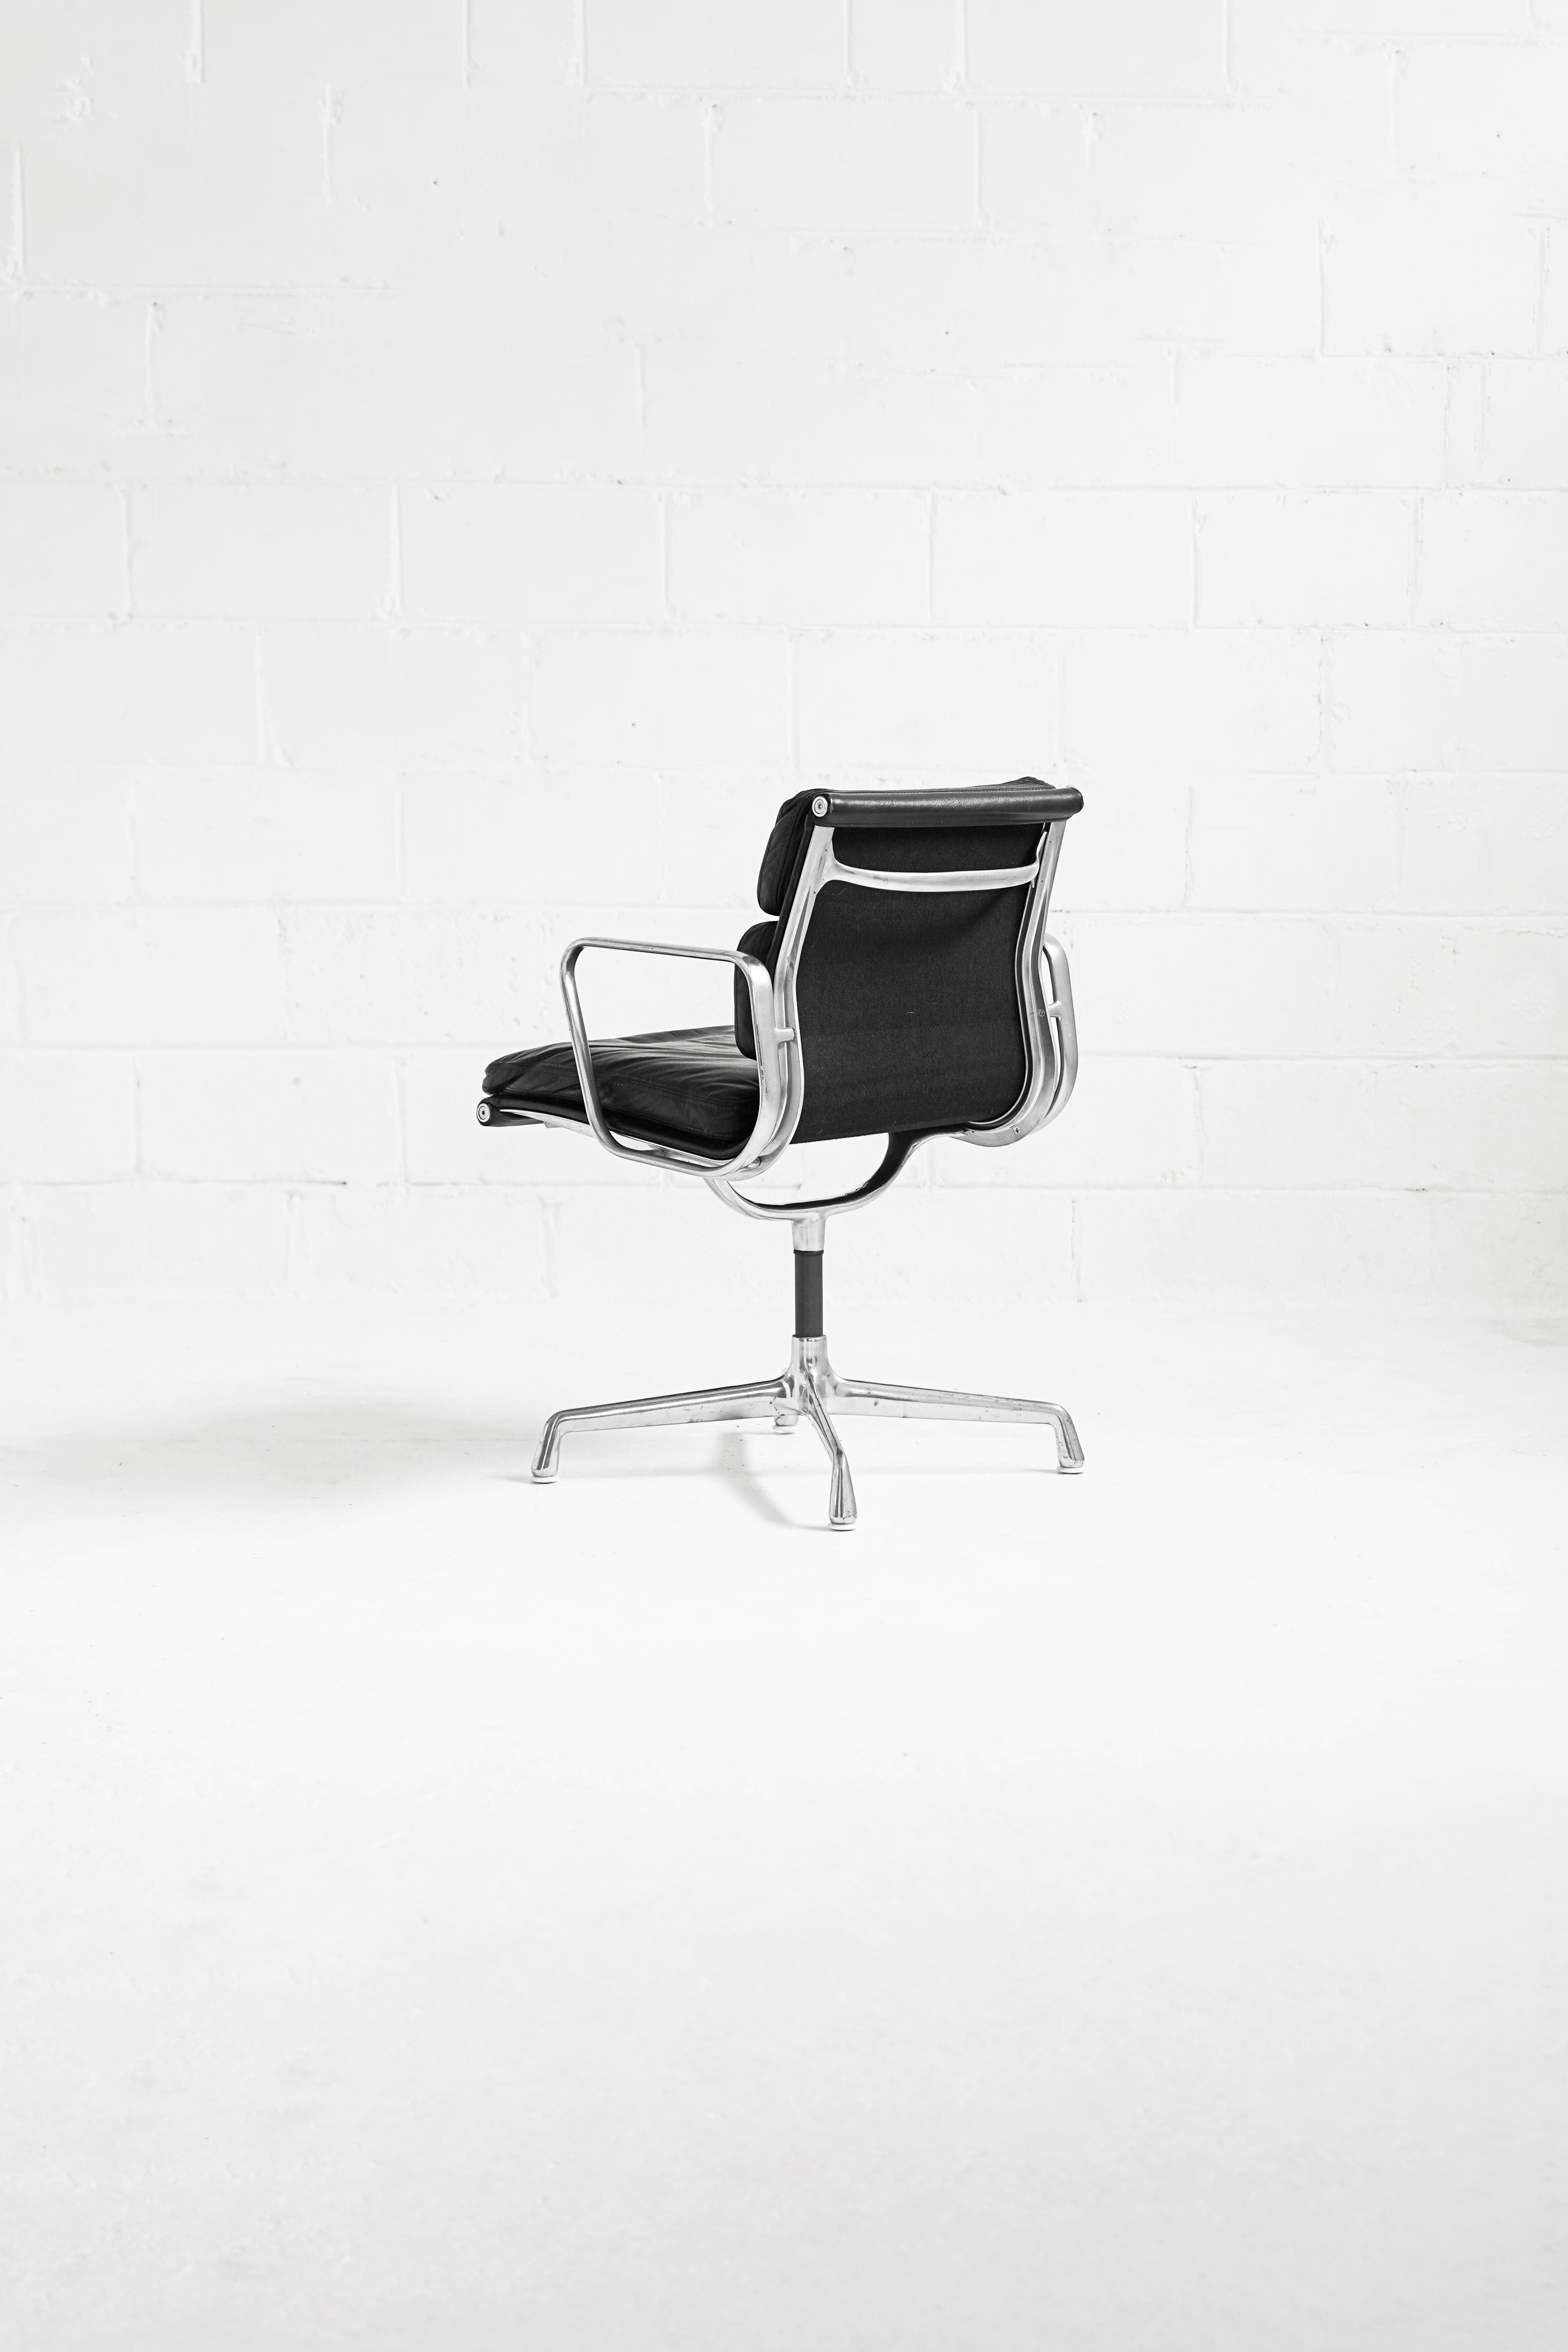 Eames Soft Pad Management Chair by Charles and Ray Eames for Herman Miller 9